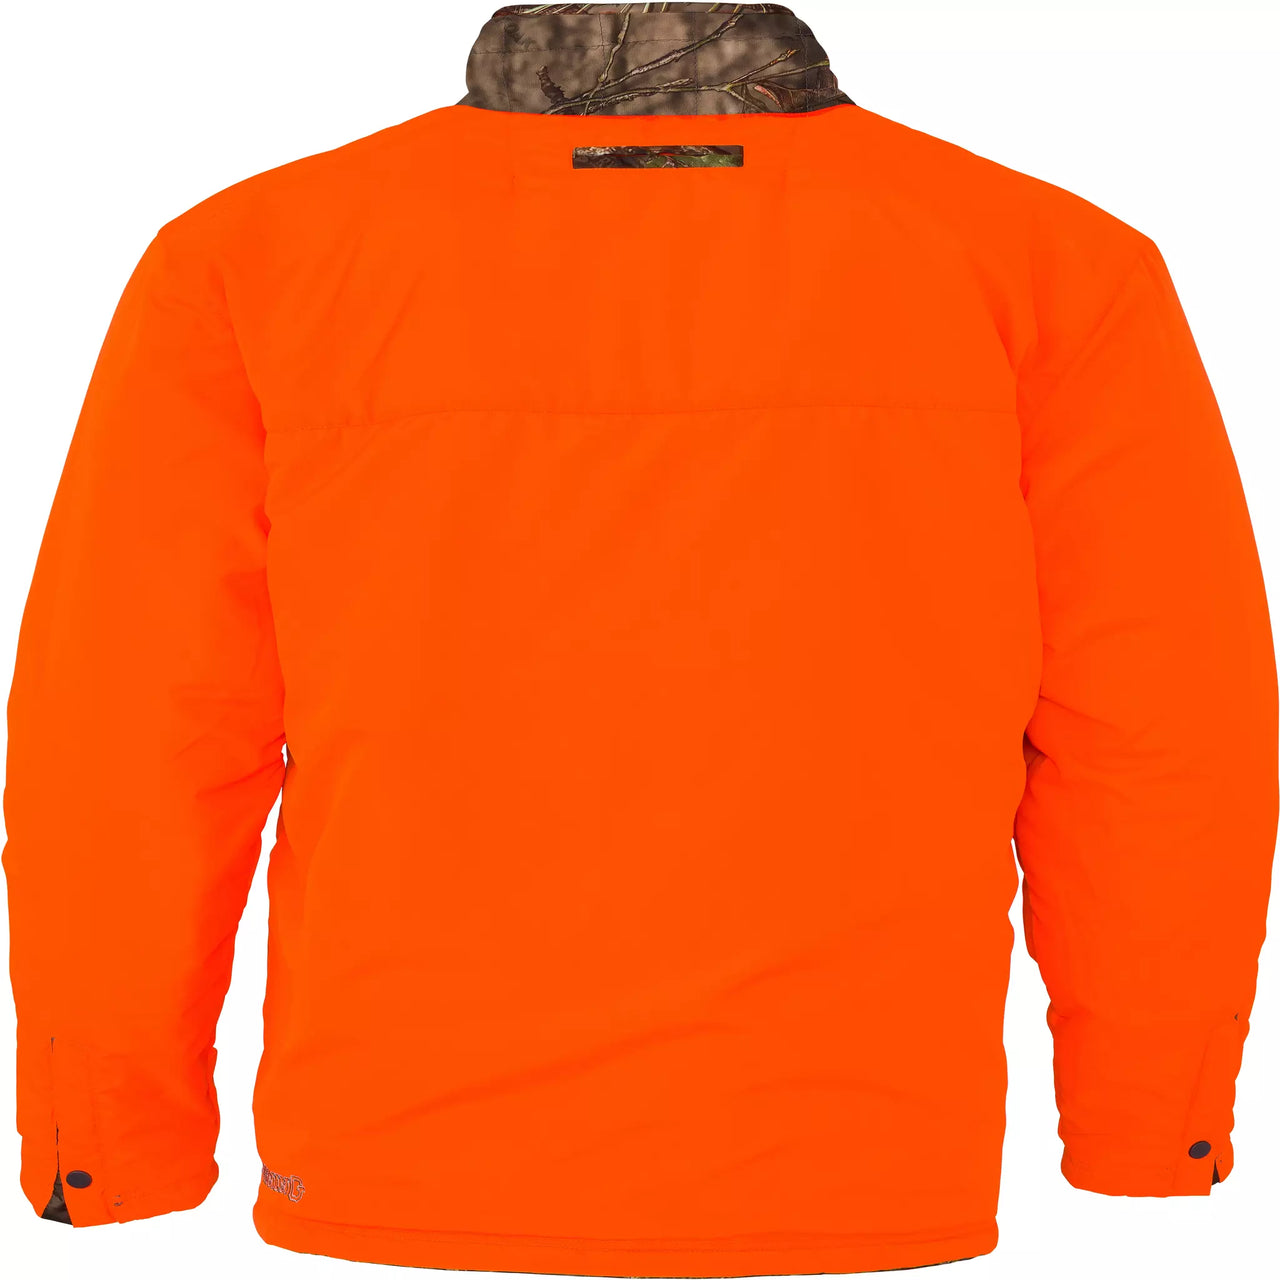 Quickchange Adults' Hunting Jacket